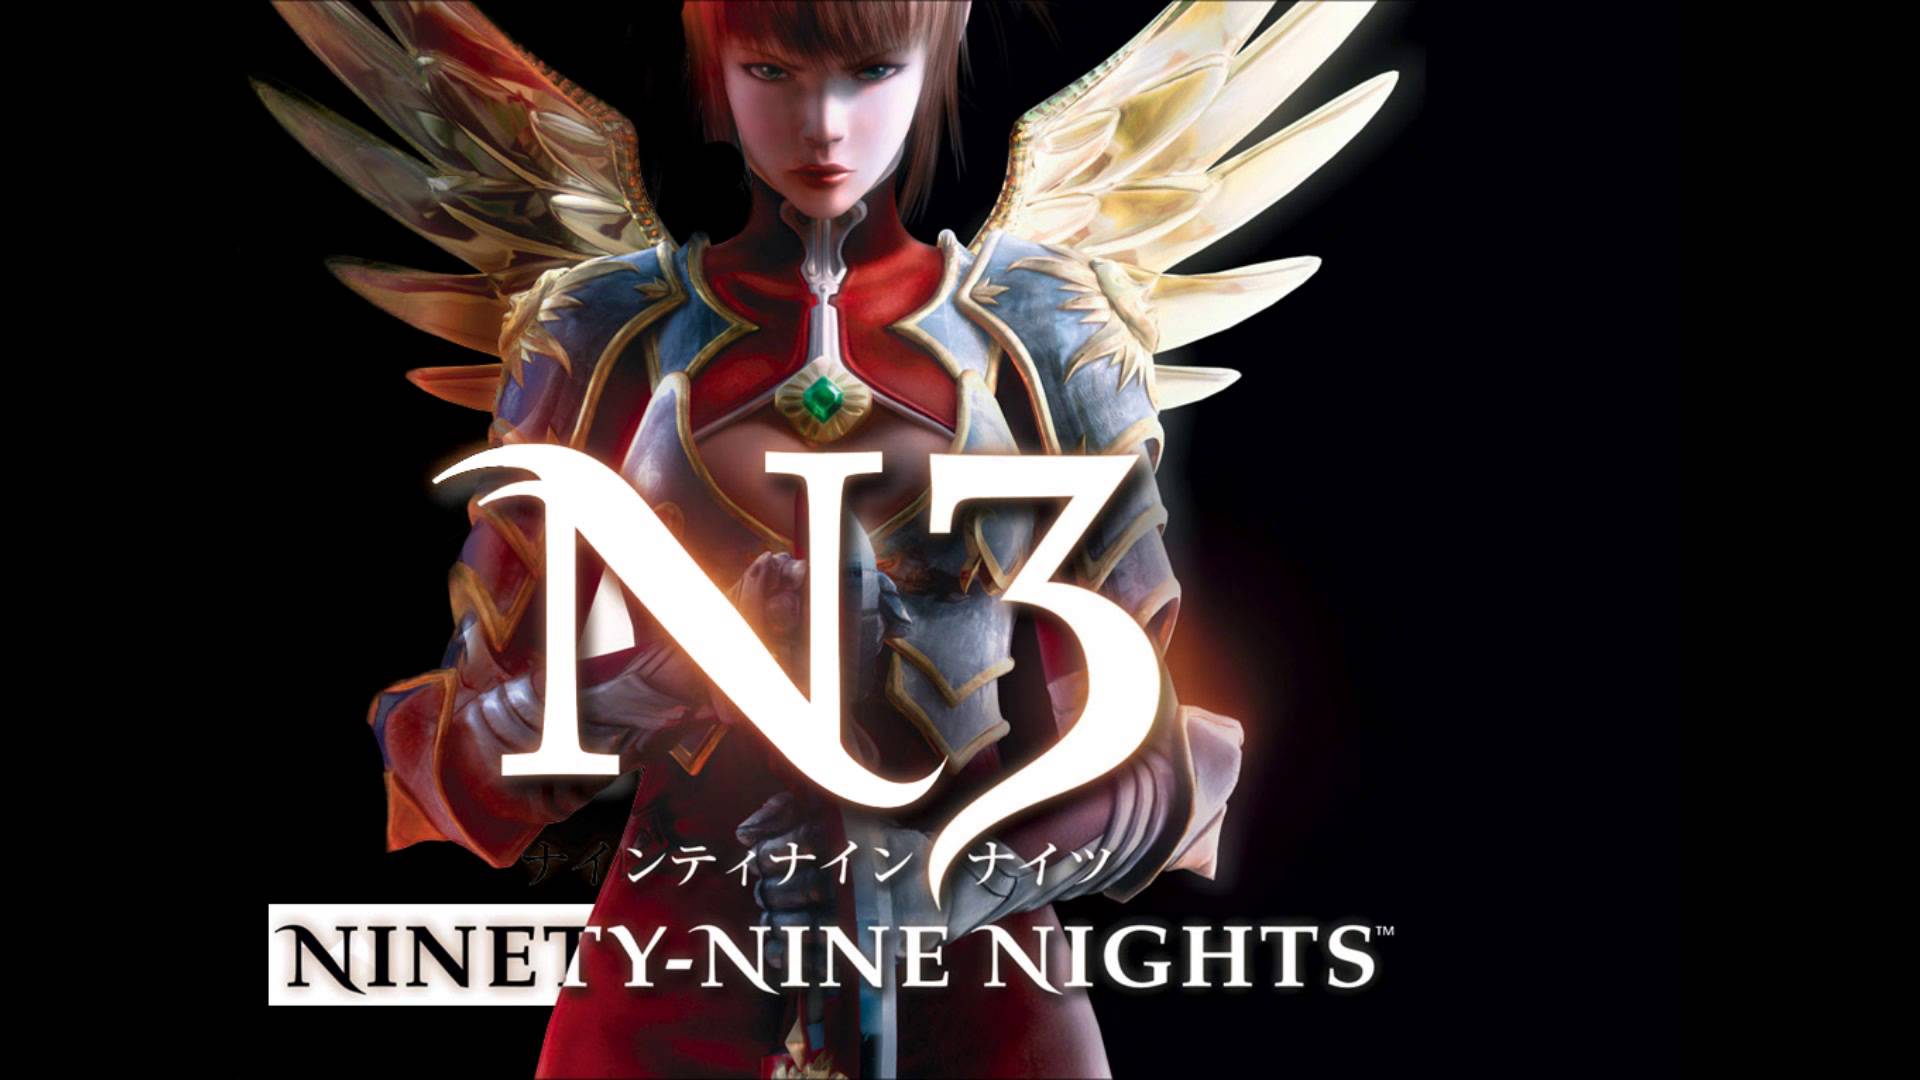 N3: Ninety-Nine Nights Backgrounds, Compatible - PC, Mobile, Gadgets| 1920x1080 px